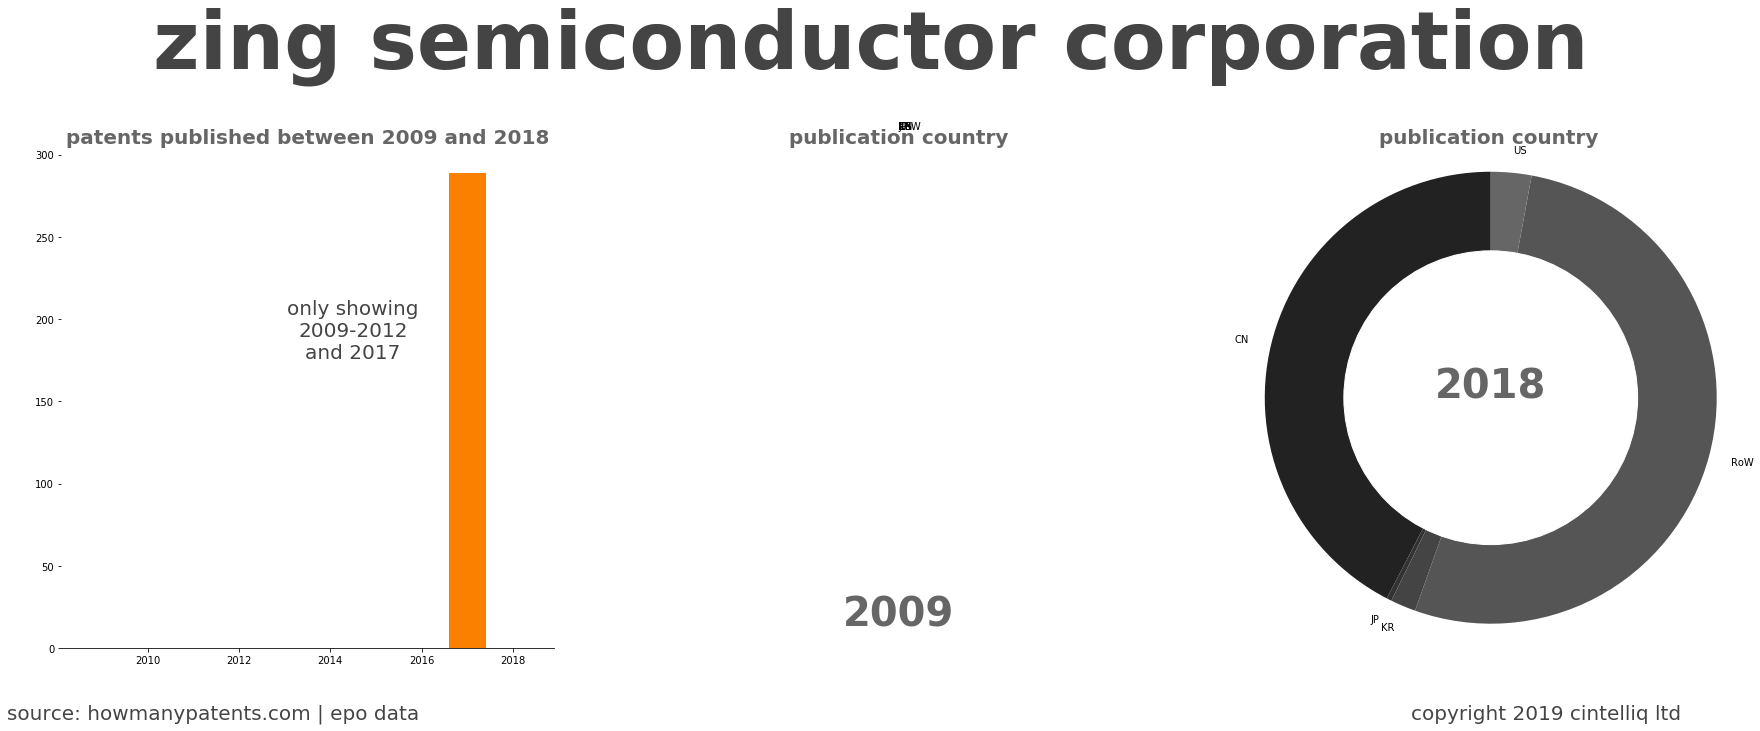 summary of patents for Zing Semiconductor Corporation